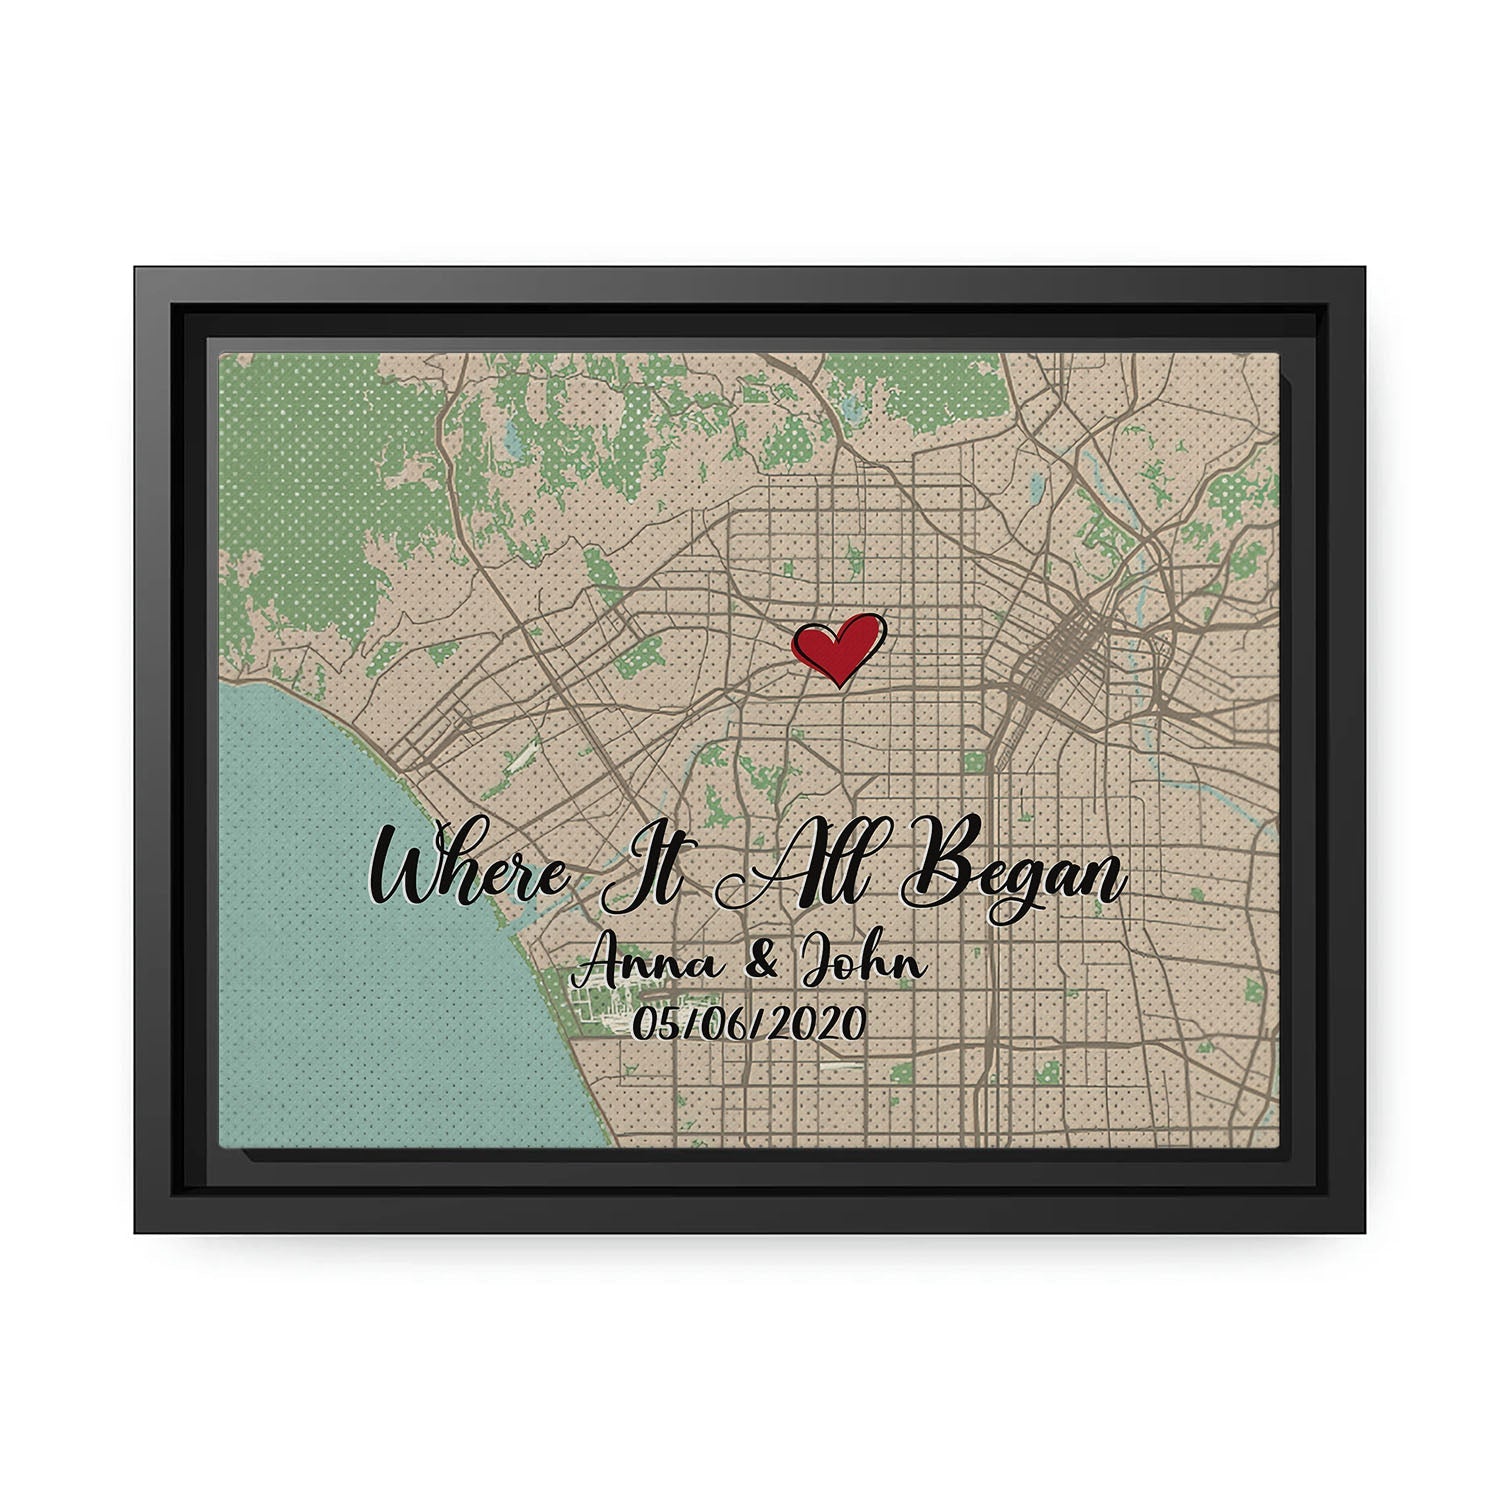 Where It All Began Horizontal Map - Personalized Anniversary, Valentine's Day gift for couple - Custom Canvas - MyMindfulGifts